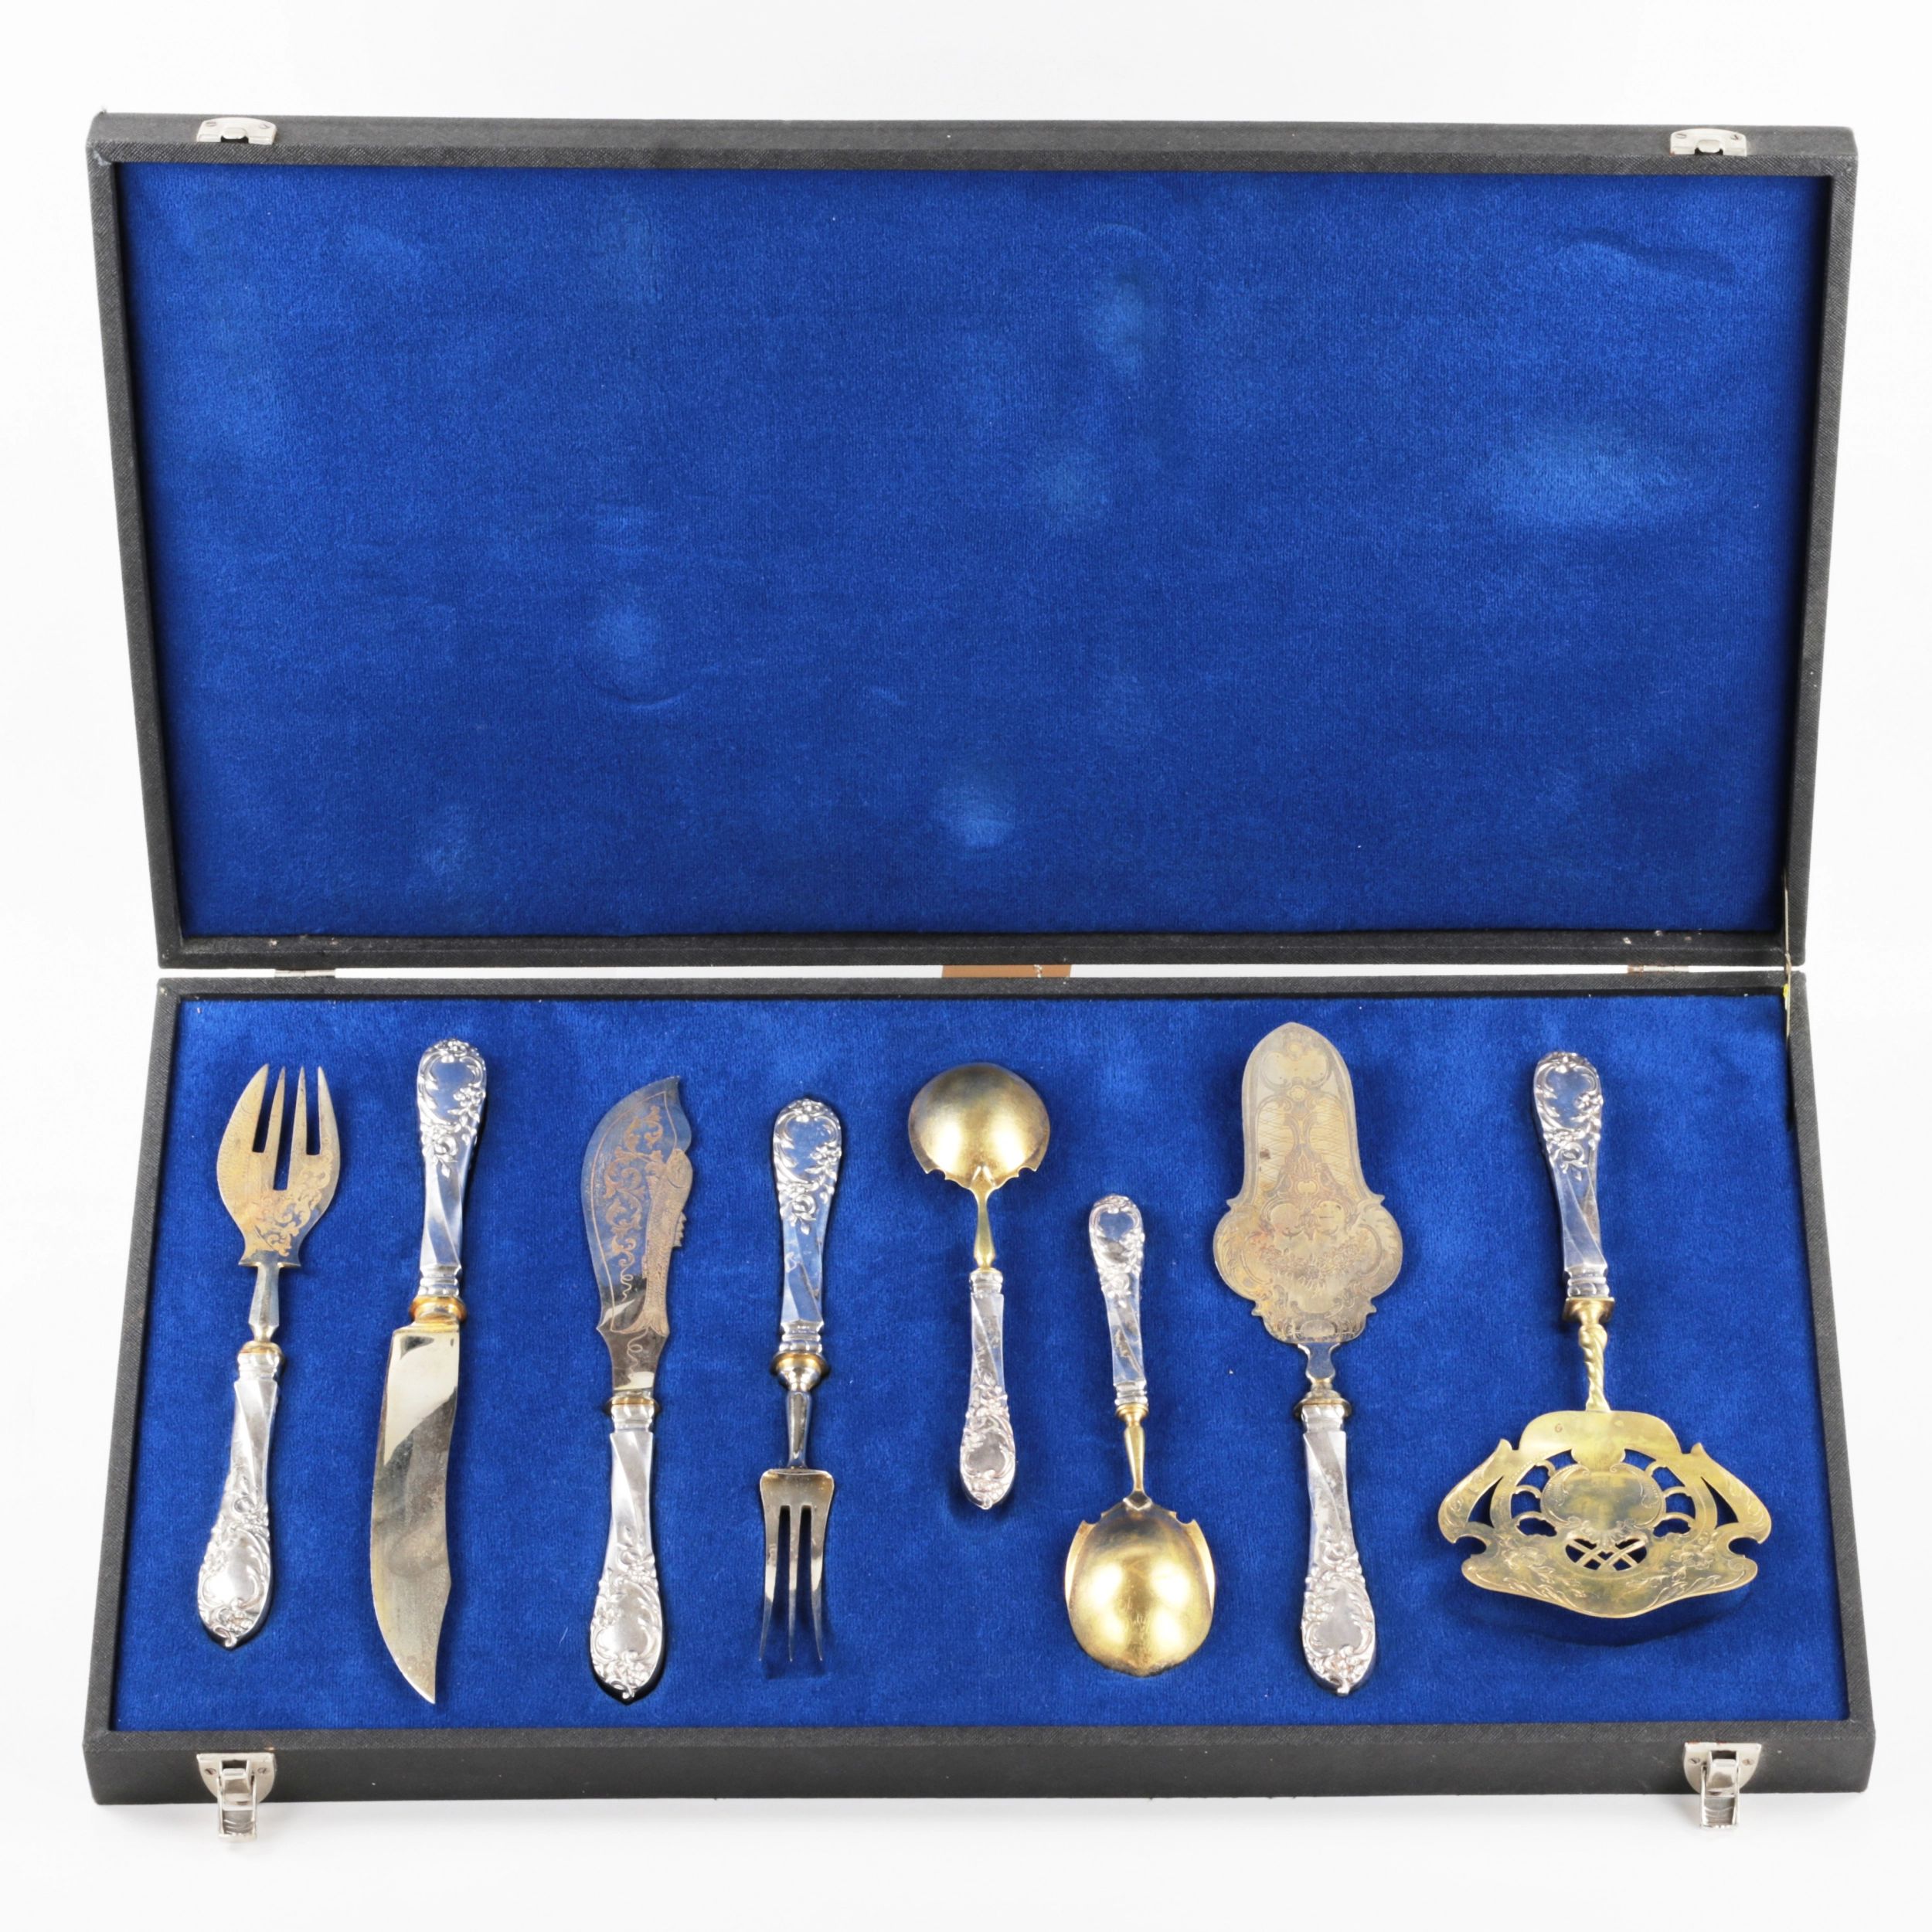 Silver-serving-set-19-20th-centuries-Germany-